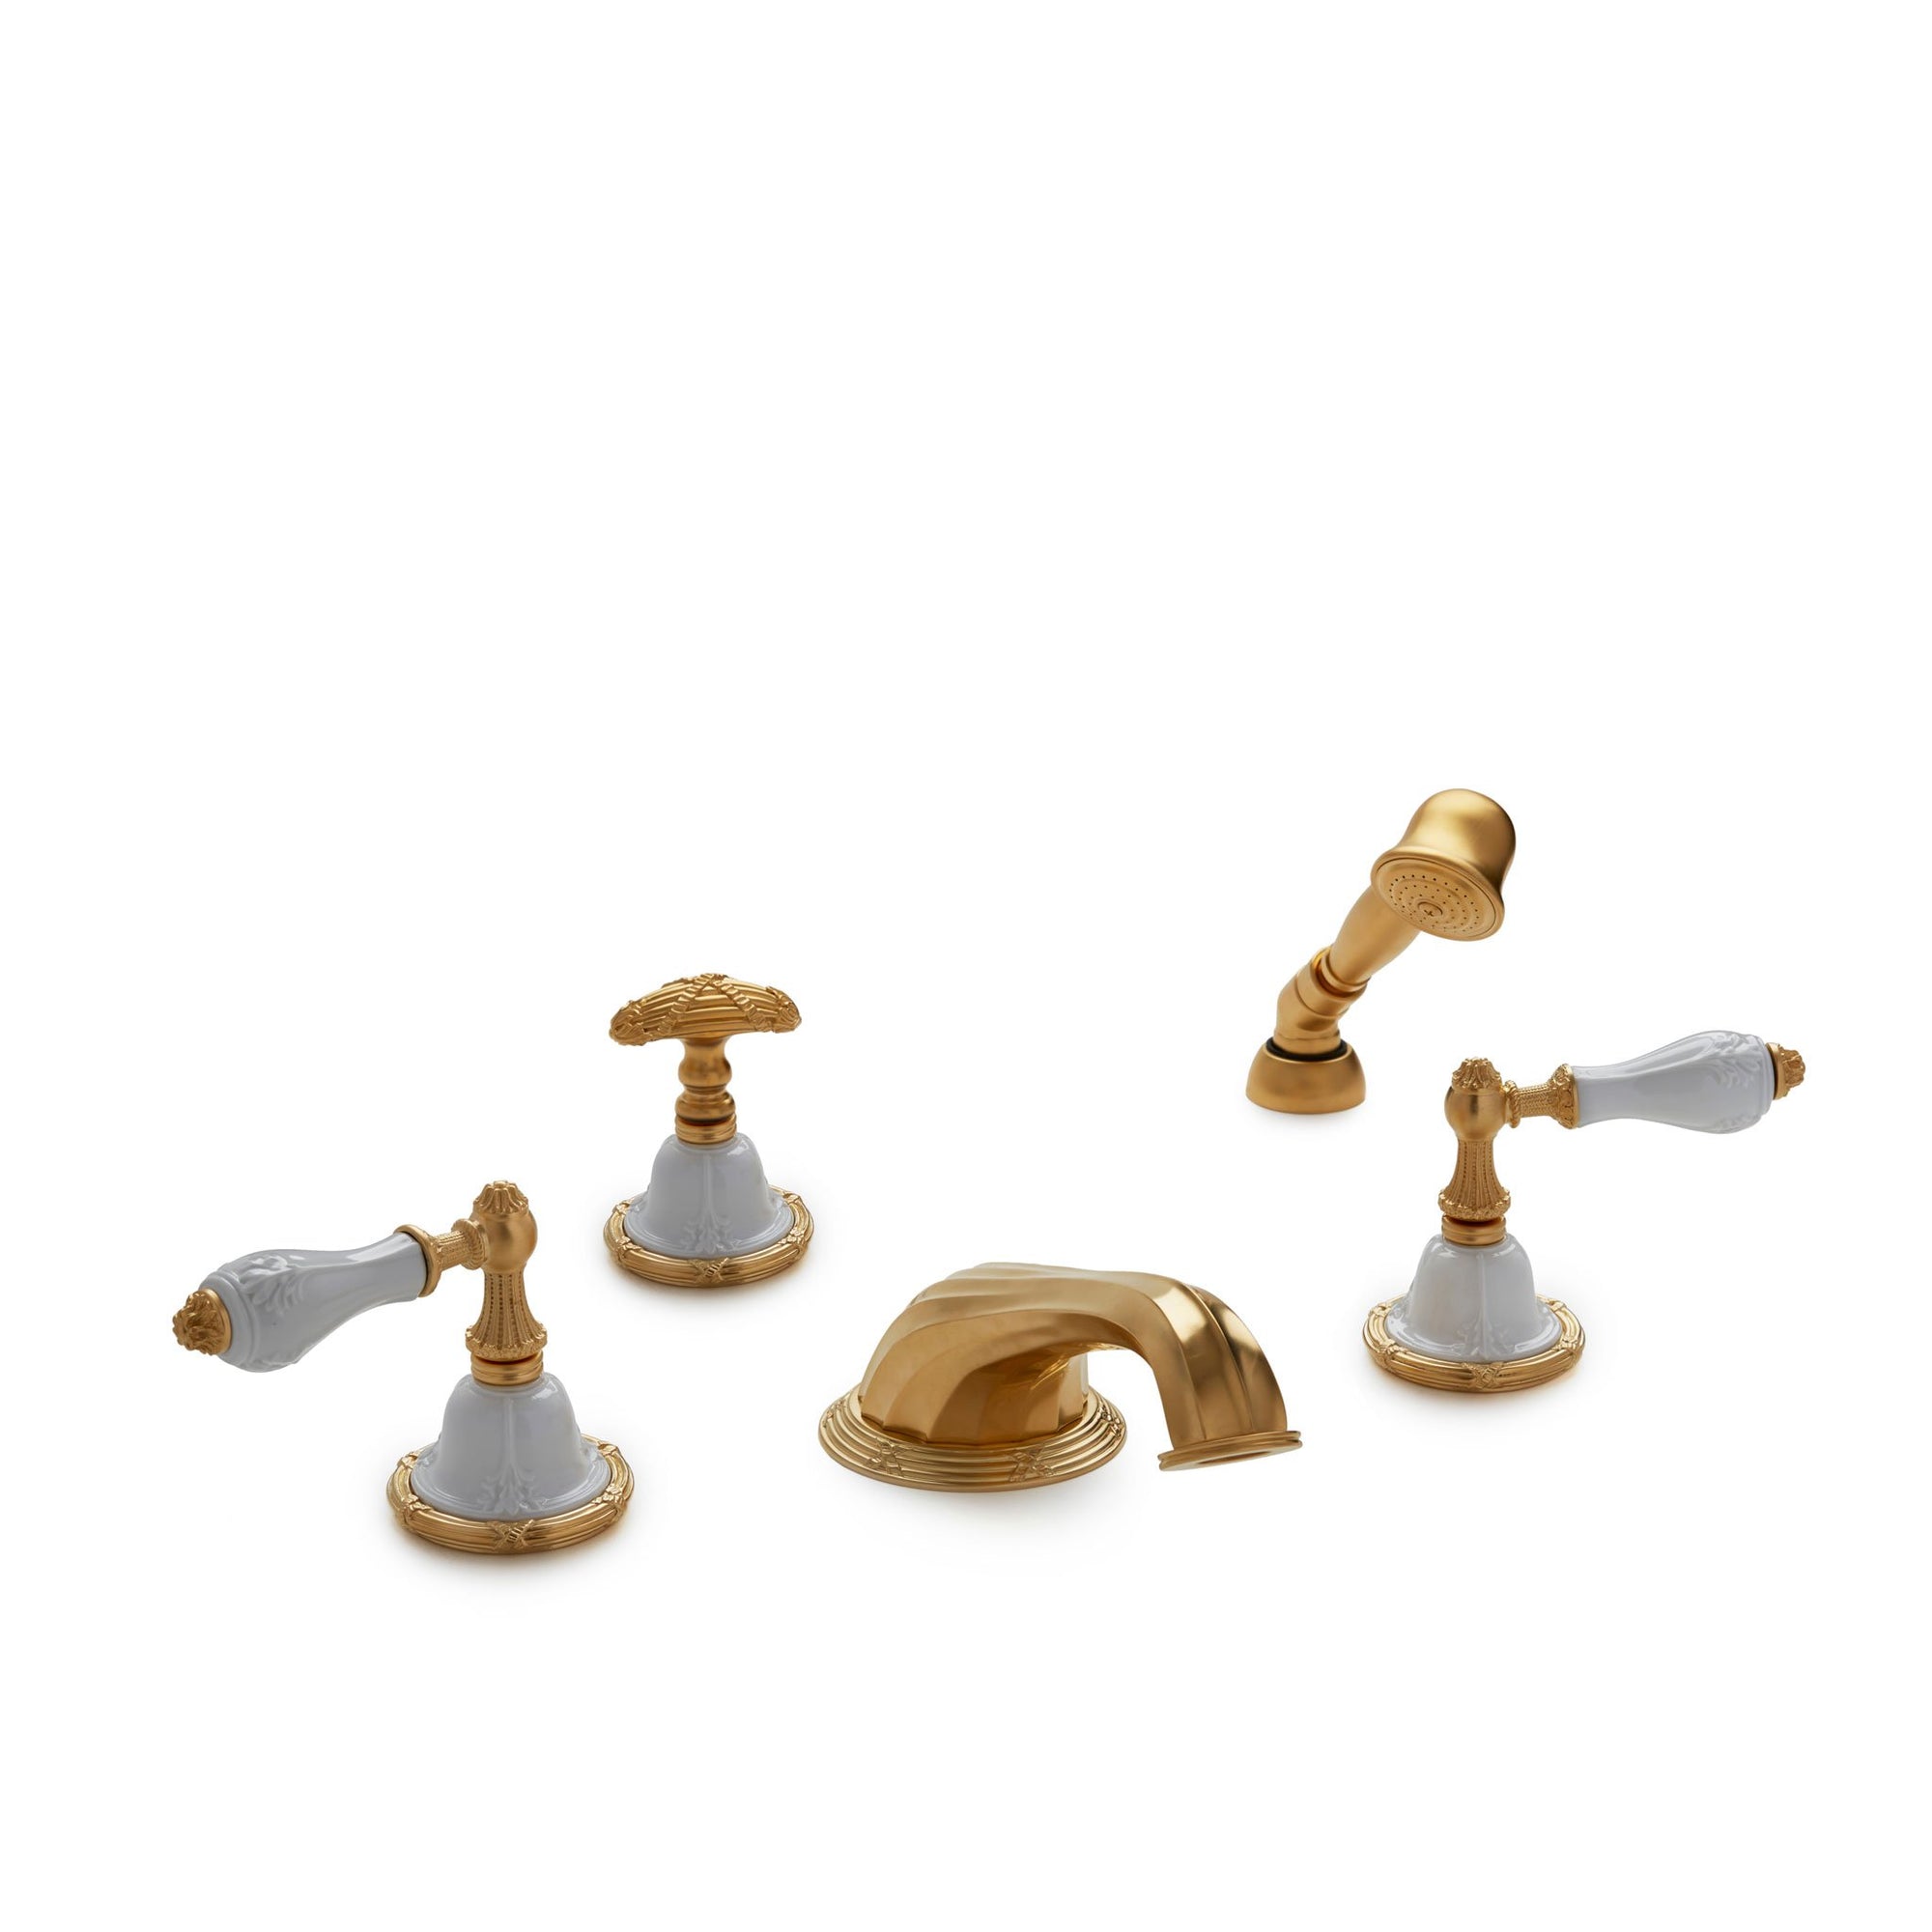 0914DTS818-04WH-GP Sherle Wagner International Provence Ceramic Empire Lever Deck Mount Tub Set with Hand Shower in Gold Plate metal finish with White Glaze inserts